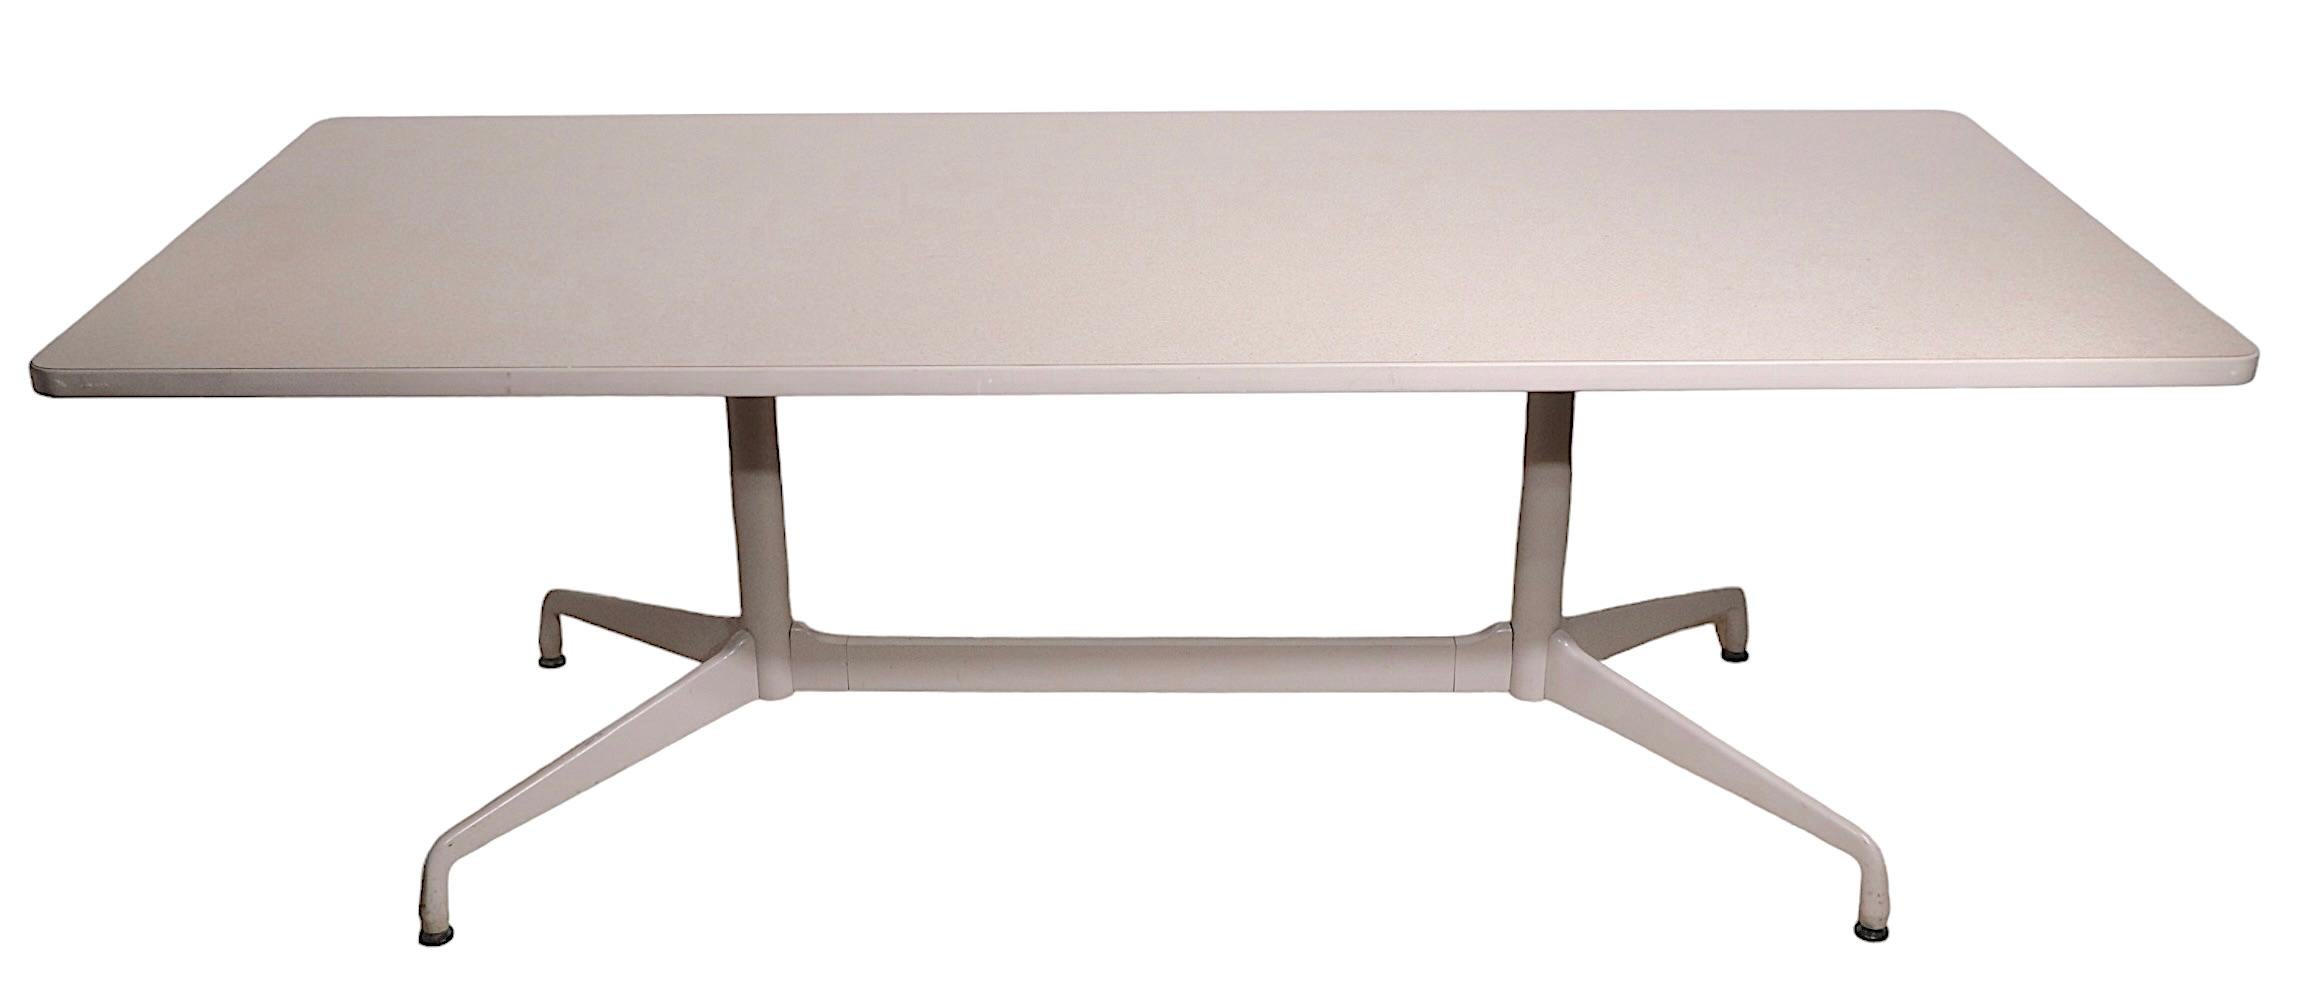 Unusual White on White Eames for Herman Miller Dining Conference Table 1